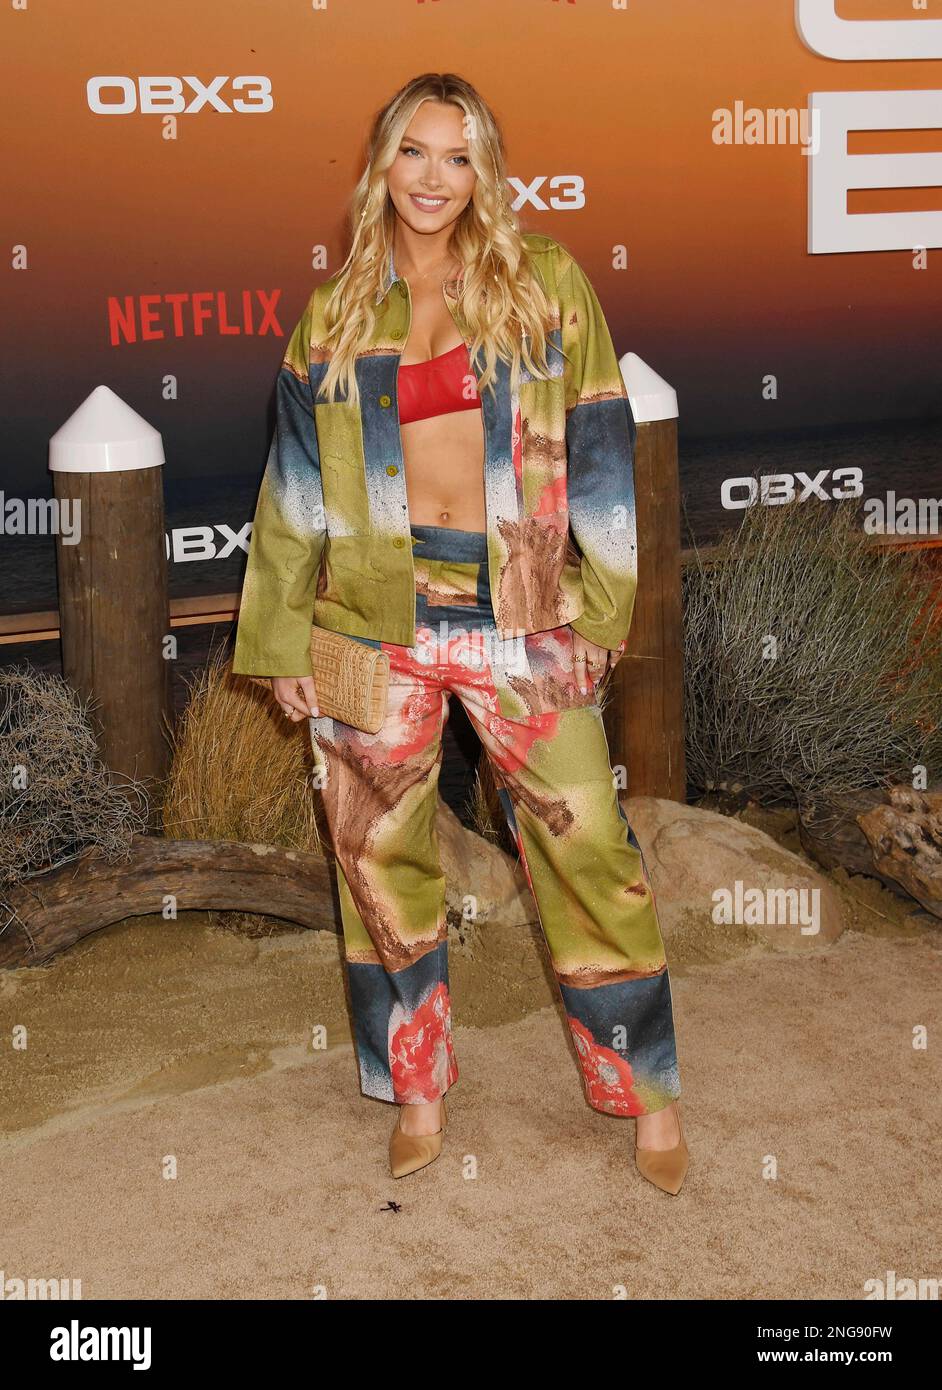 LOS ANGELES, CALIFORNIA - FEBRUARY 16: Camille Kostek attends the Los Angeles premiere of Netflix's 'Outer Banks at Regency Village Theatre on Februar Stock Photo